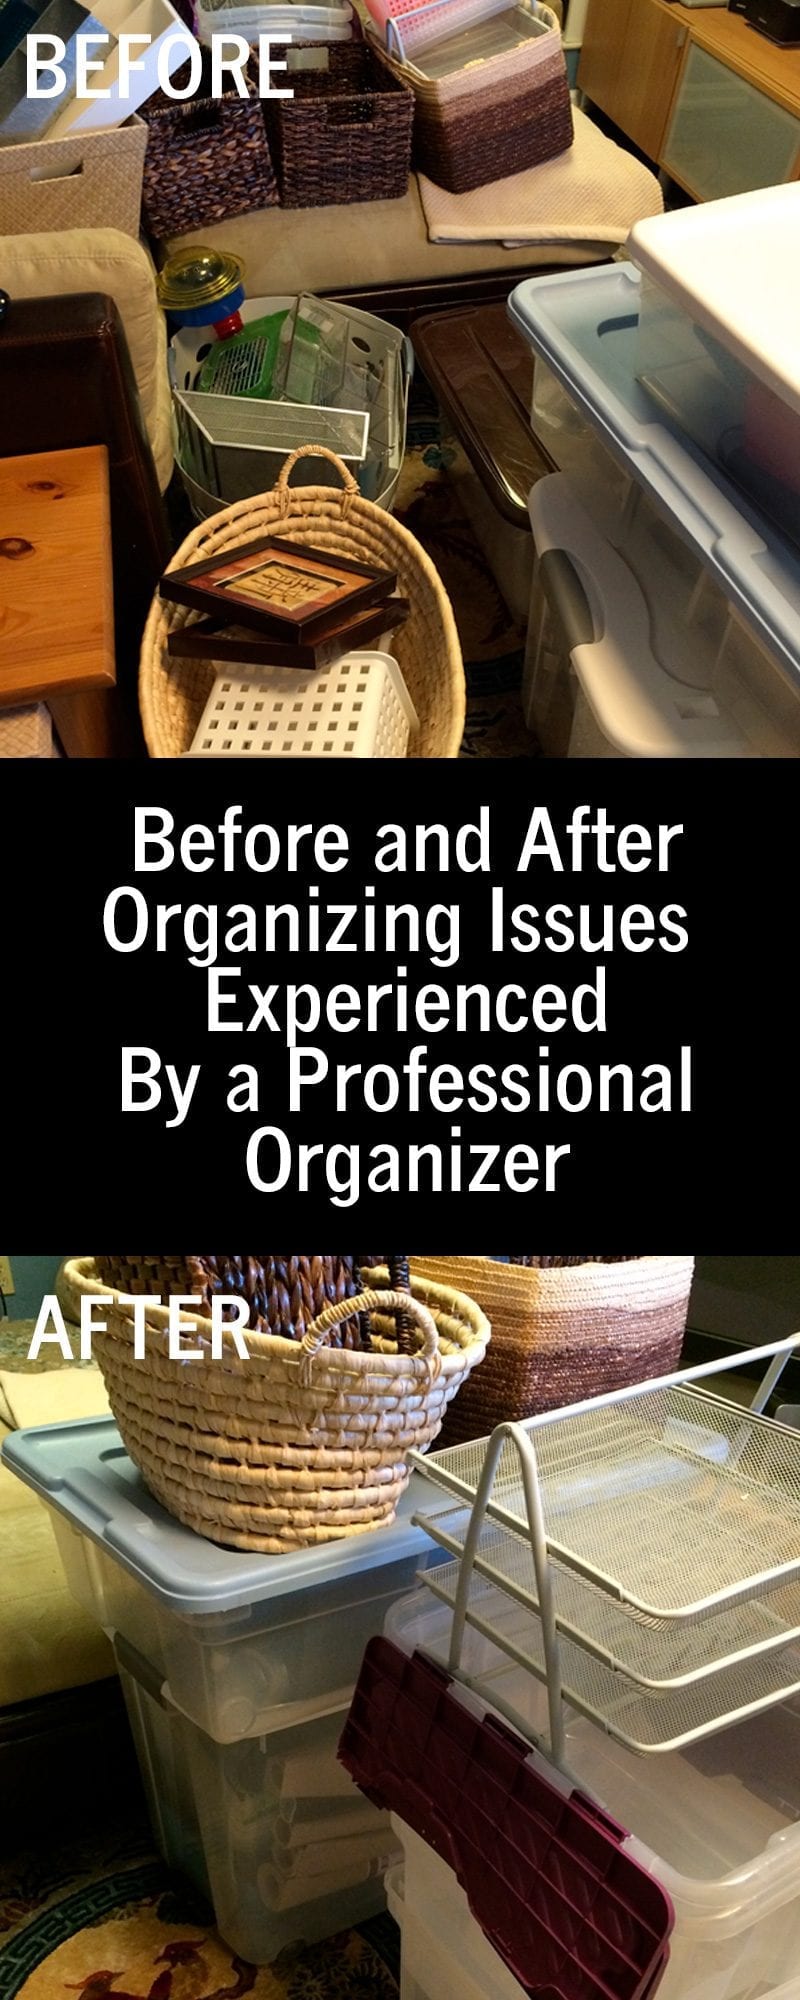 Before and After Organizing Issues Experienced By A Professional Organizer